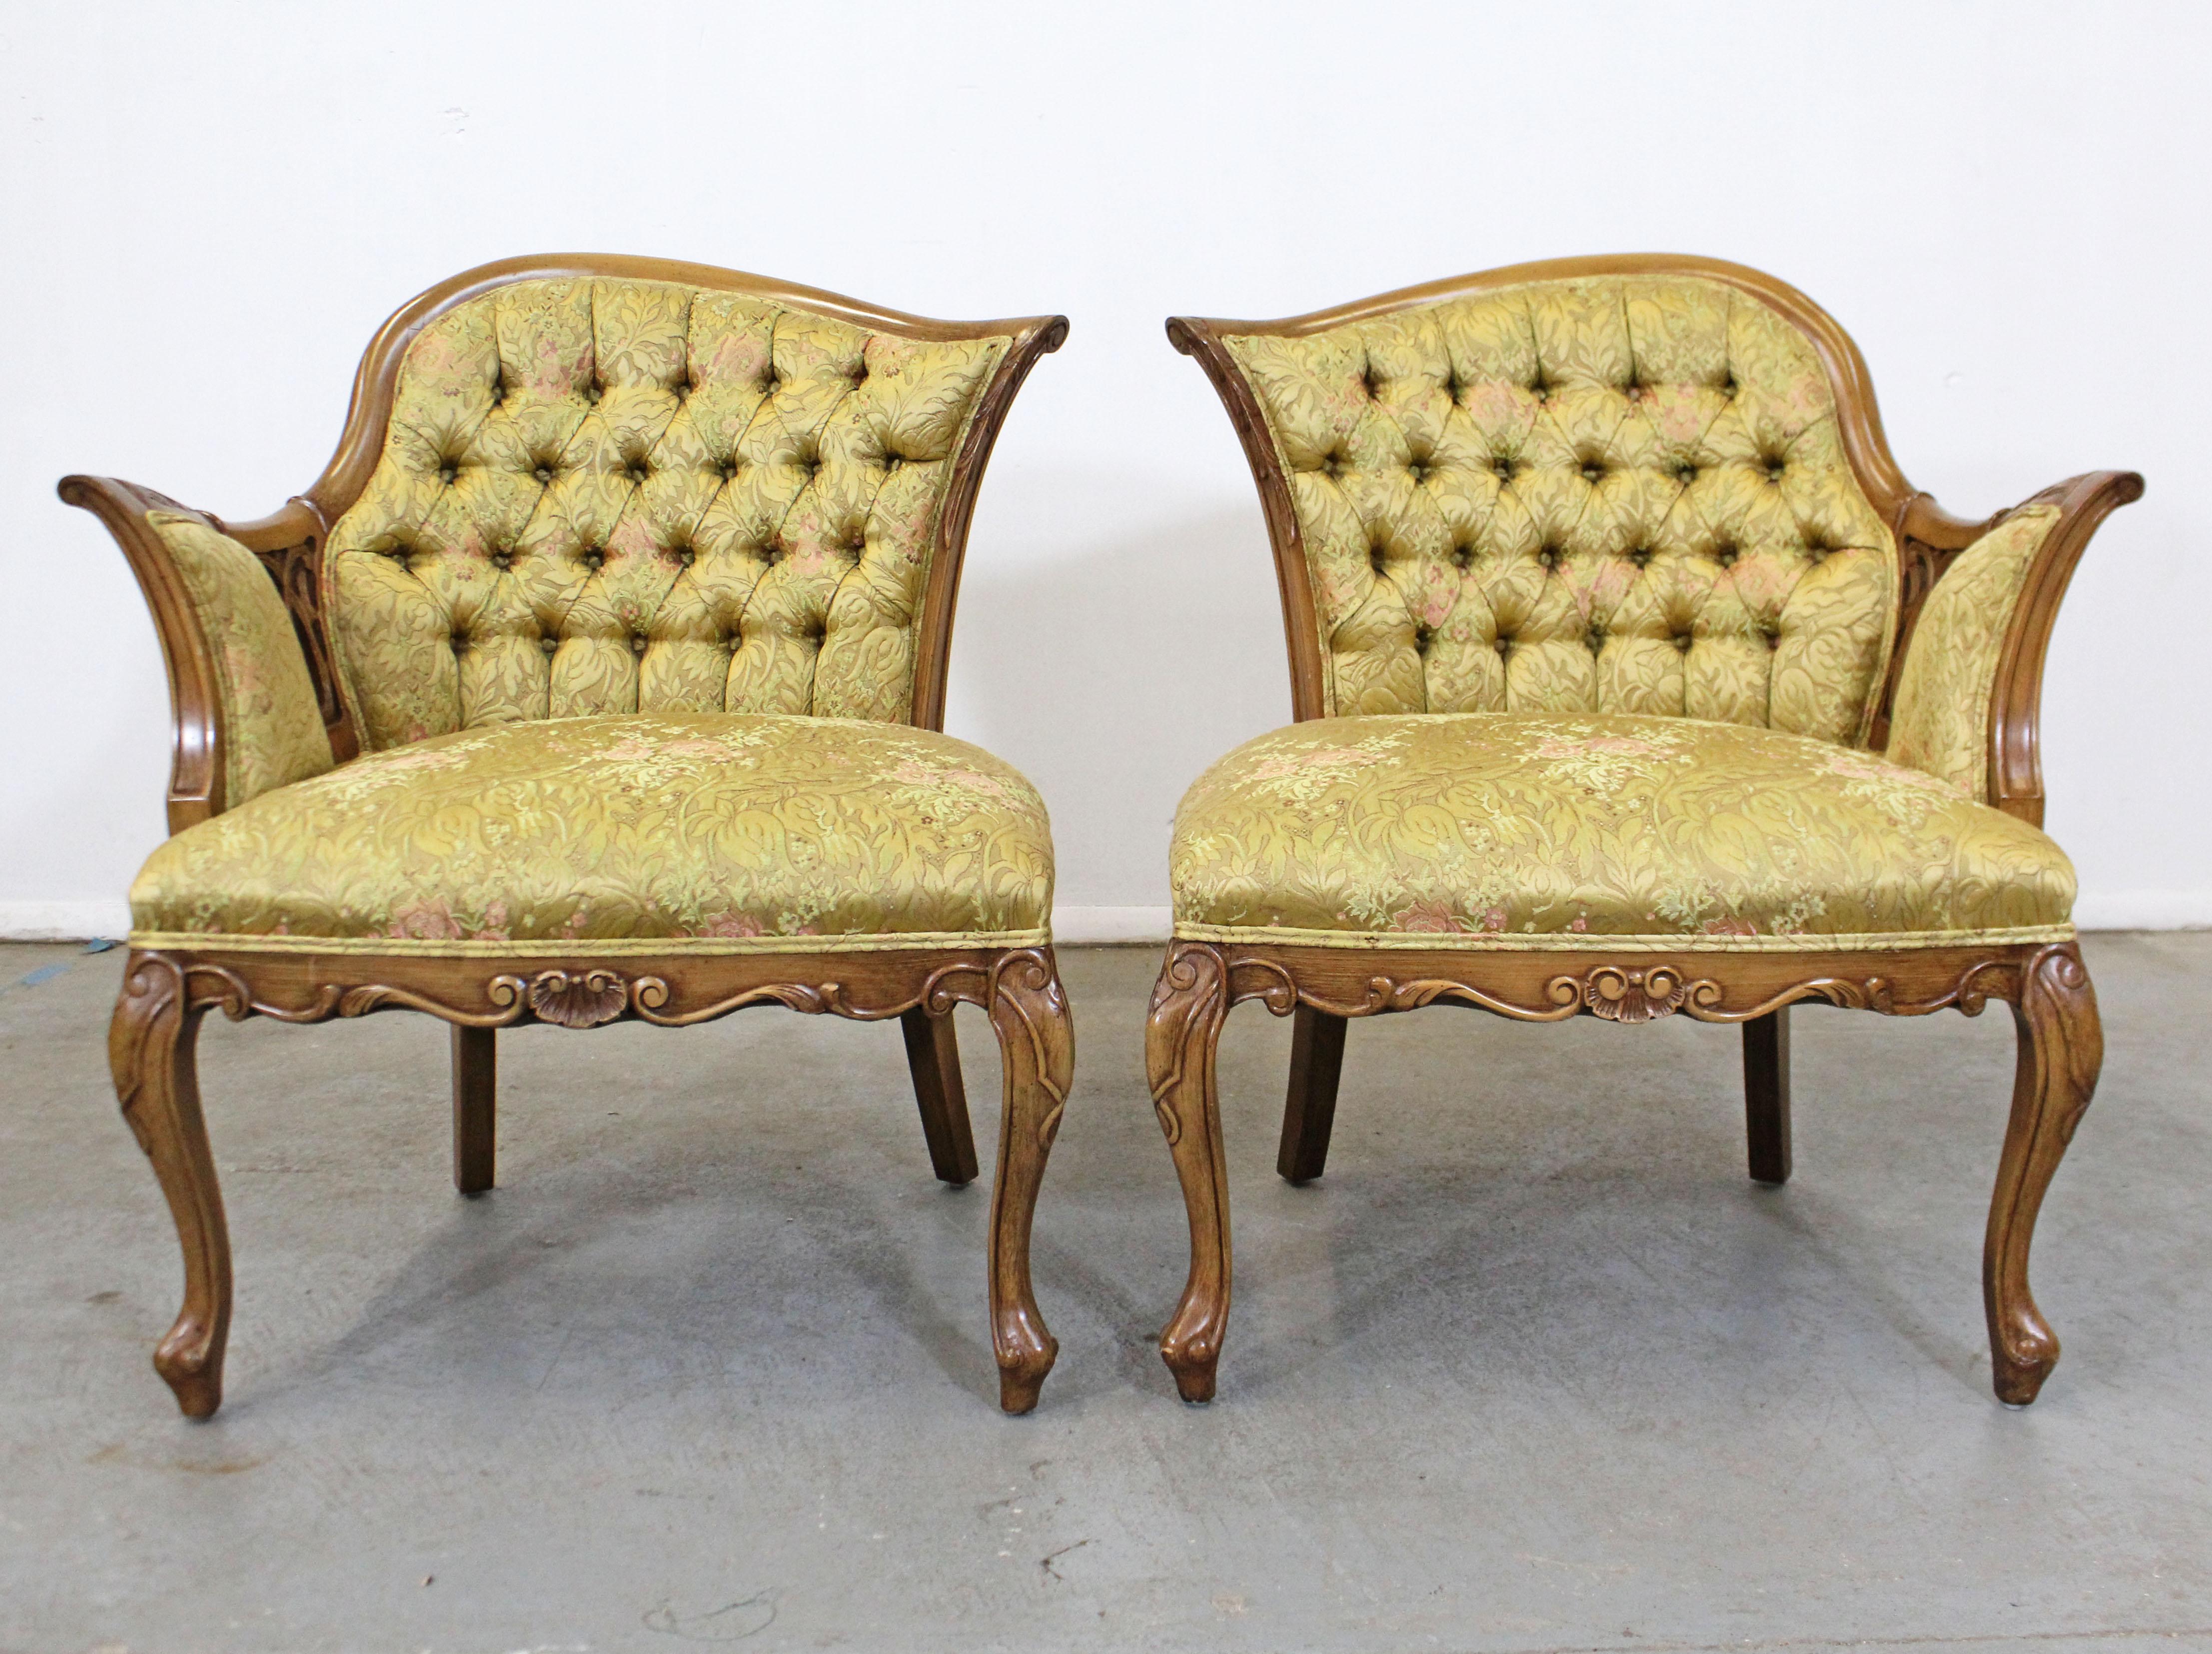 Offered is a pair of vintage French fireside chairs with beautiful tufted upholstery with a floral print. Features beautifully carved arms and legs with floral upholstery. This chair design dates back to the 17th century meant for women wearing hoop